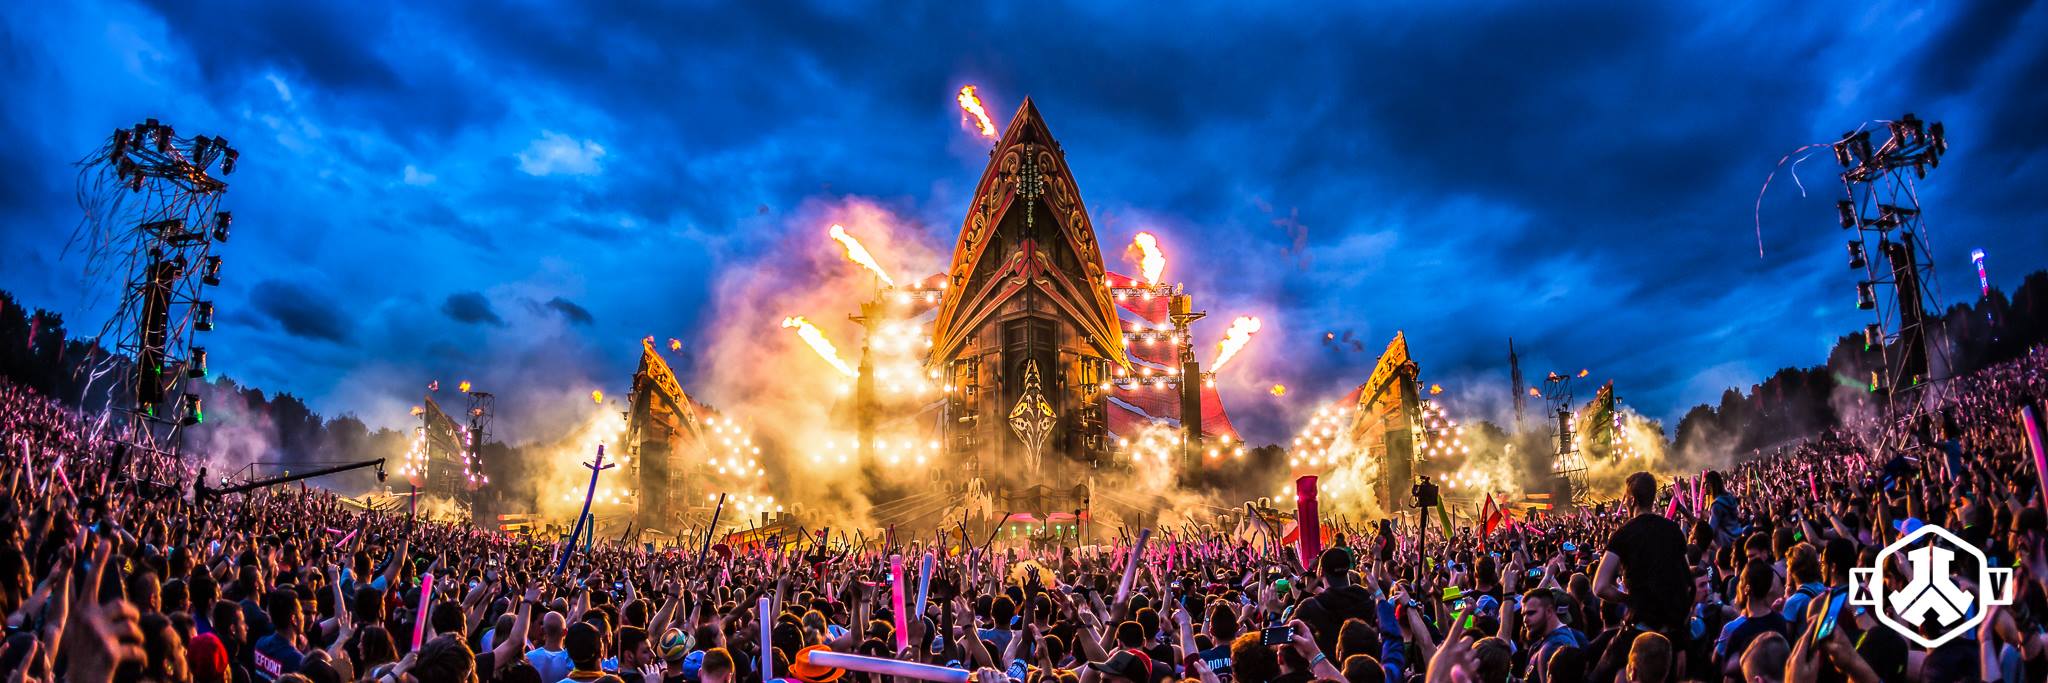 19621113 10154998378419775 2926234309431074113 O - Defqon 1 2017 Stage , HD Wallpaper & Backgrounds